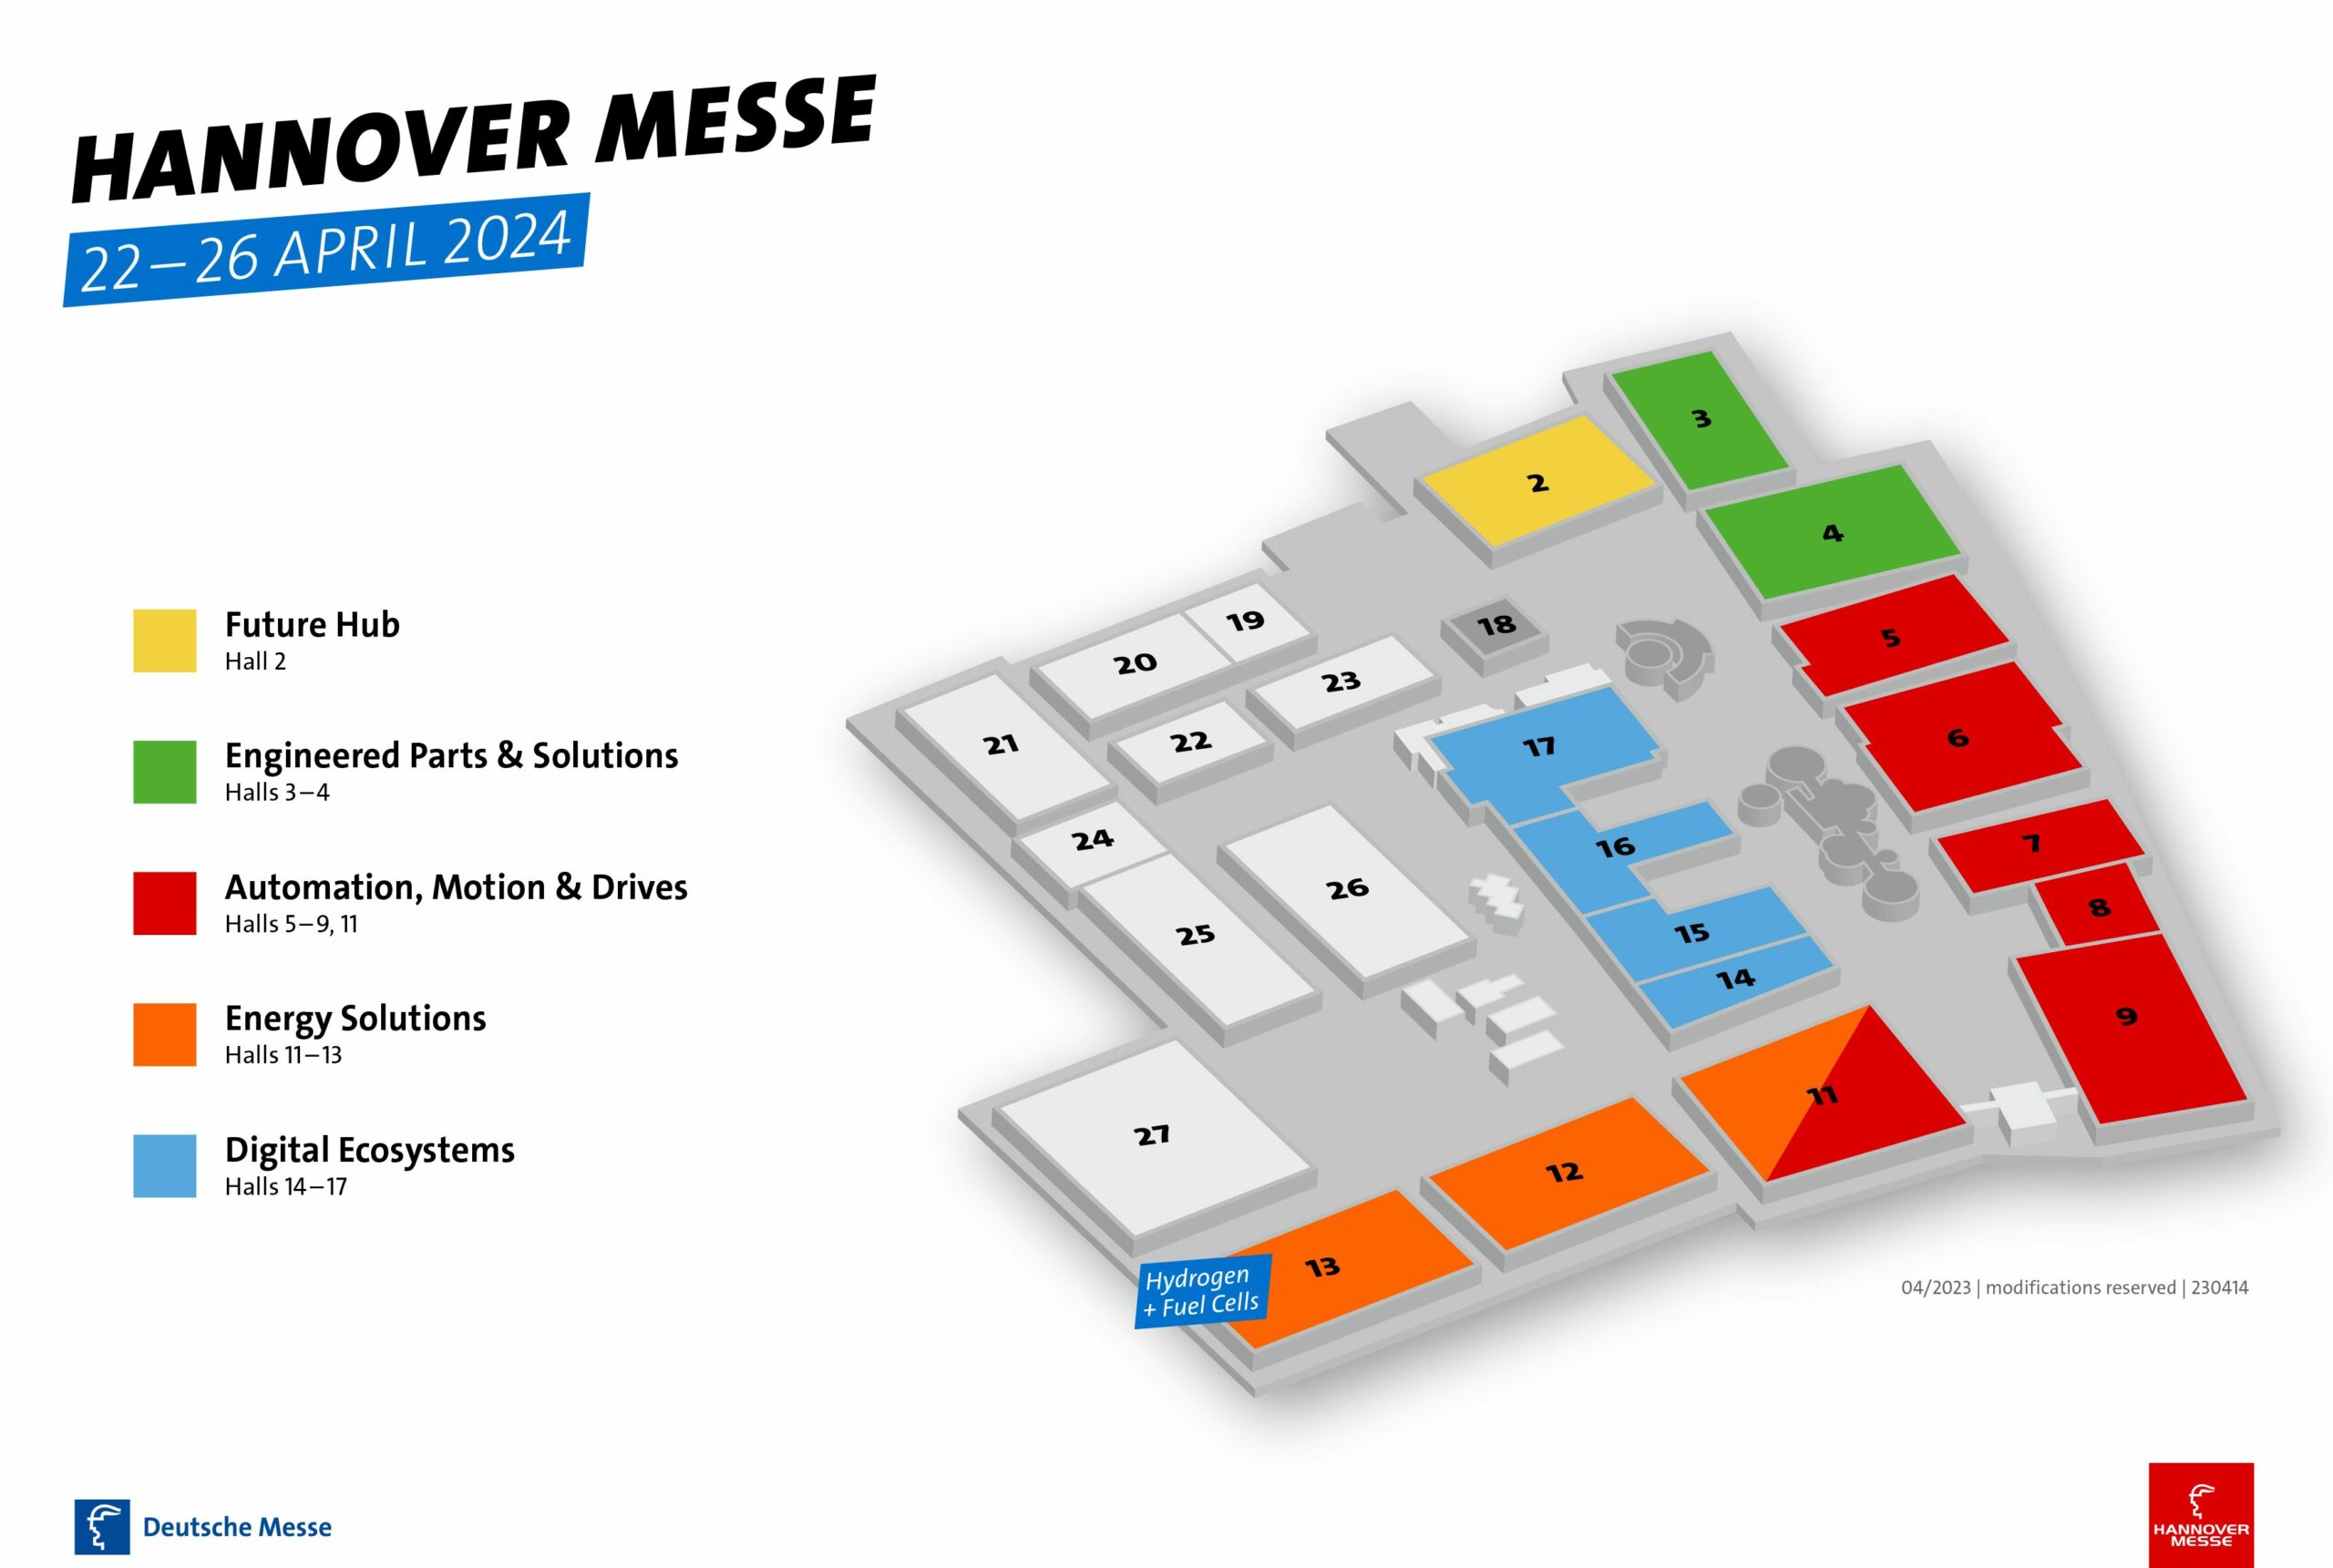 More Information About the 2024 Hannover Messe Taking Place in April